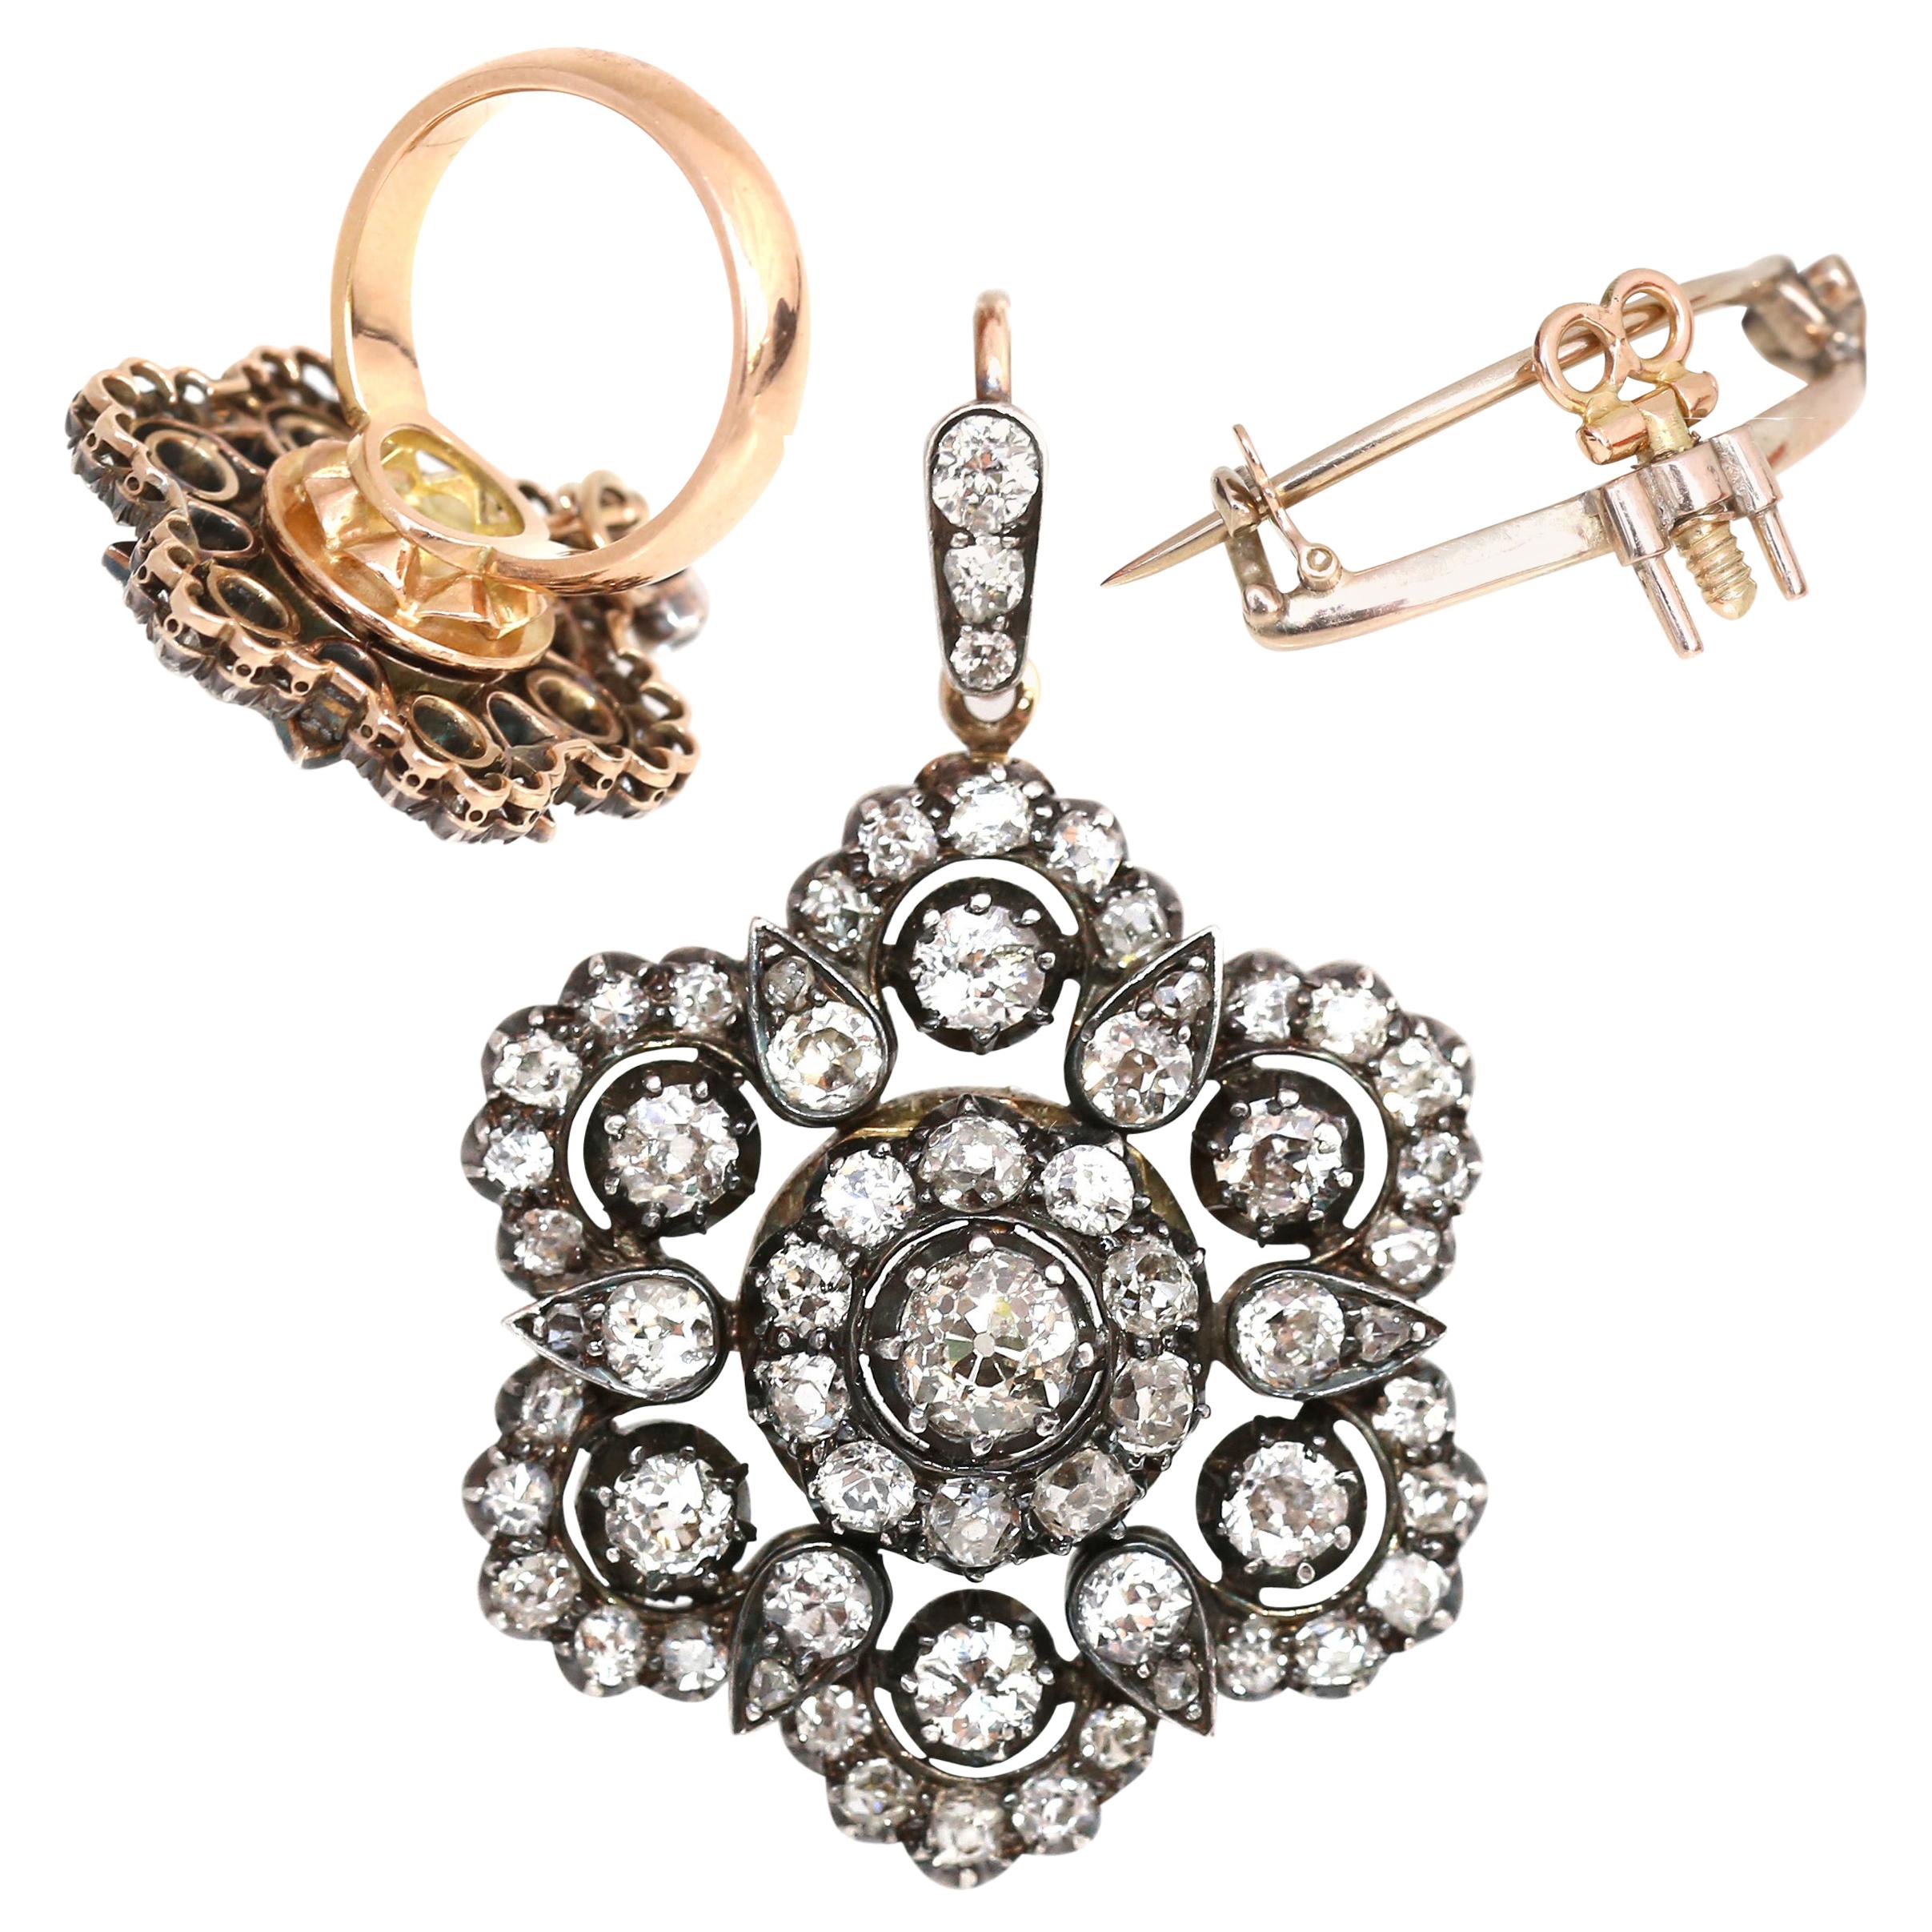 Transformable Victorian Ring into the Pendant to the Brooch. The rare item almost 4 ct old-mine diamonds. 1880.
Just imagine that in one piece of jewelry you get a cocktail ring for the evening party, a pin brooch for the concert and a fine pendant